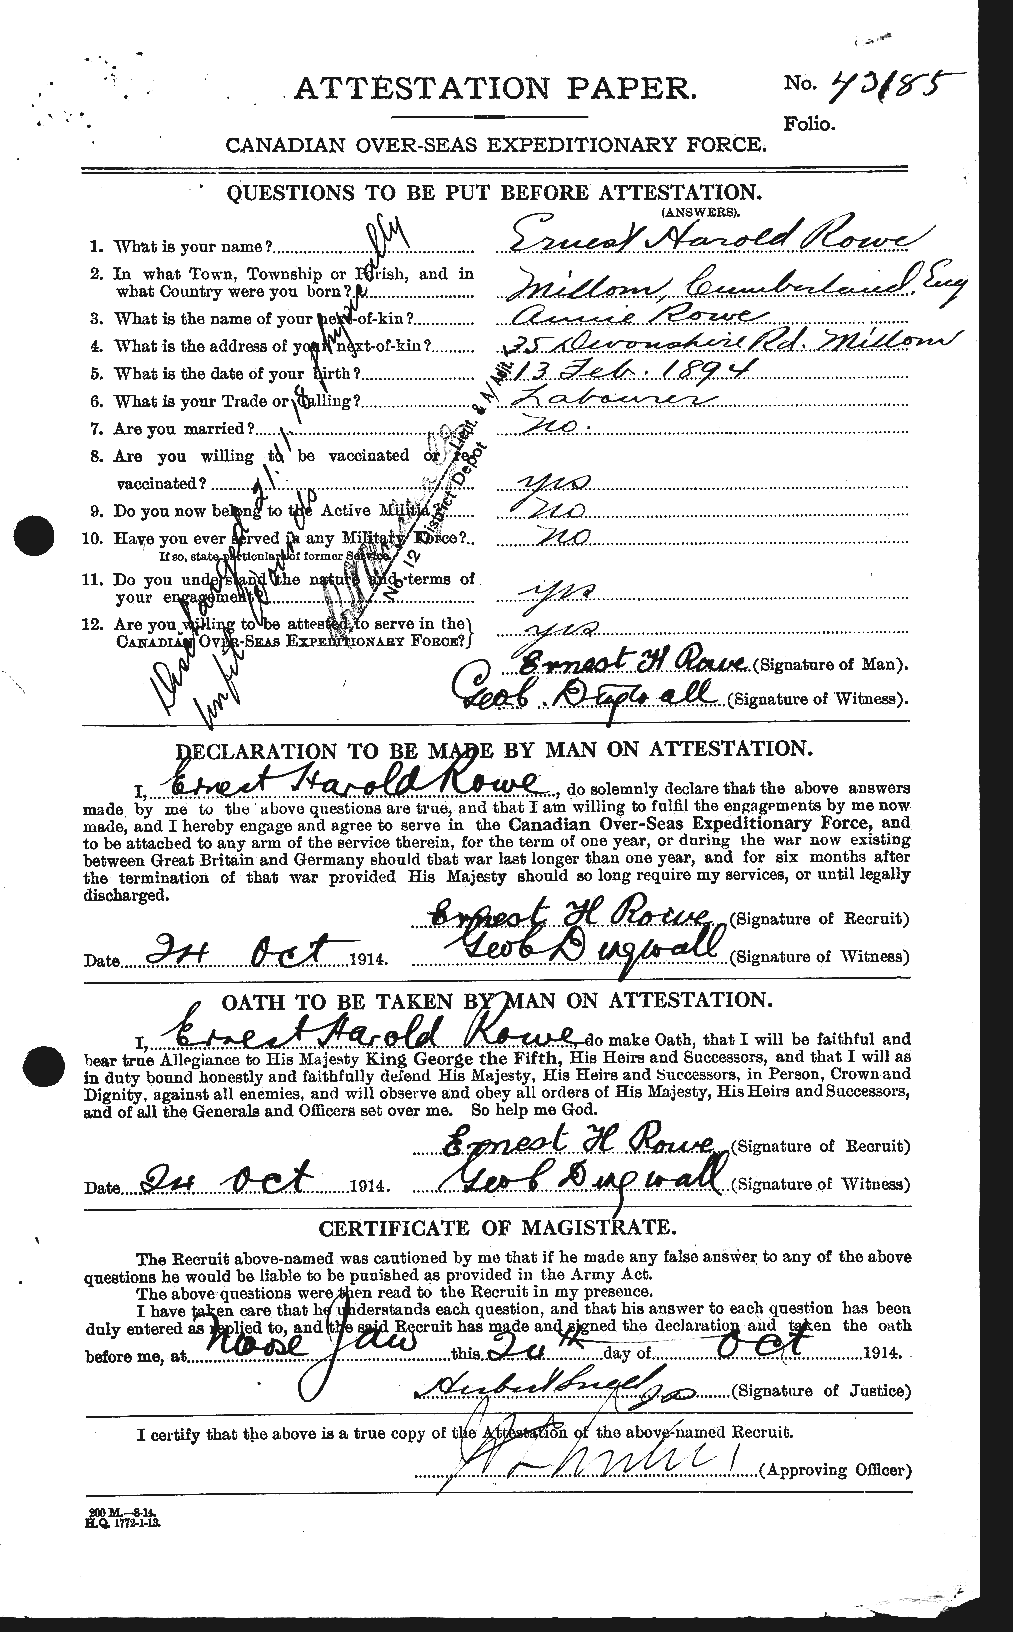 Personnel Records of the First World War - CEF 615845a